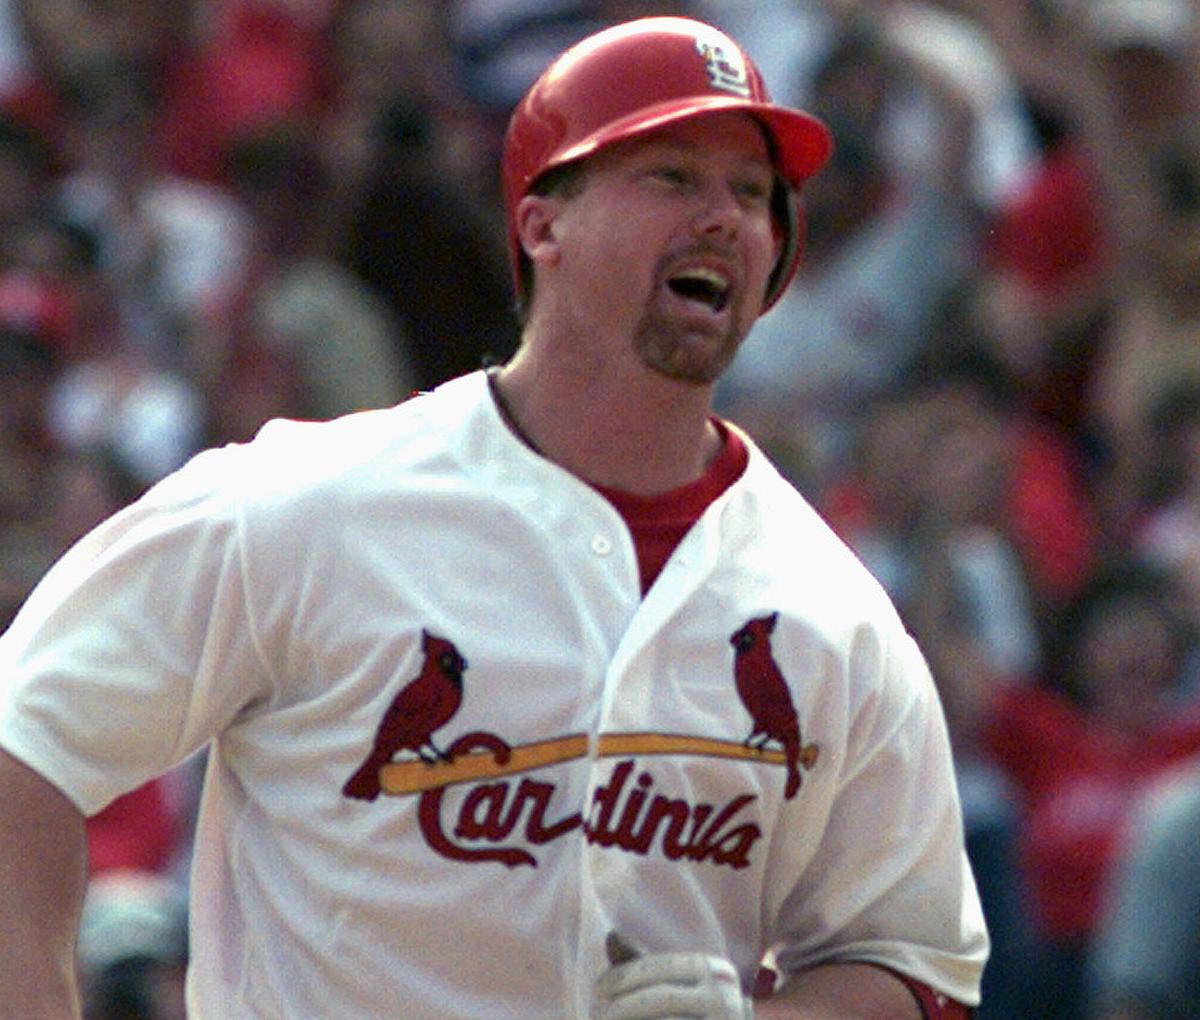 McGwire is one Massive Man  St louis cardinals baseball, Cardinals baseball,  Cardinals players